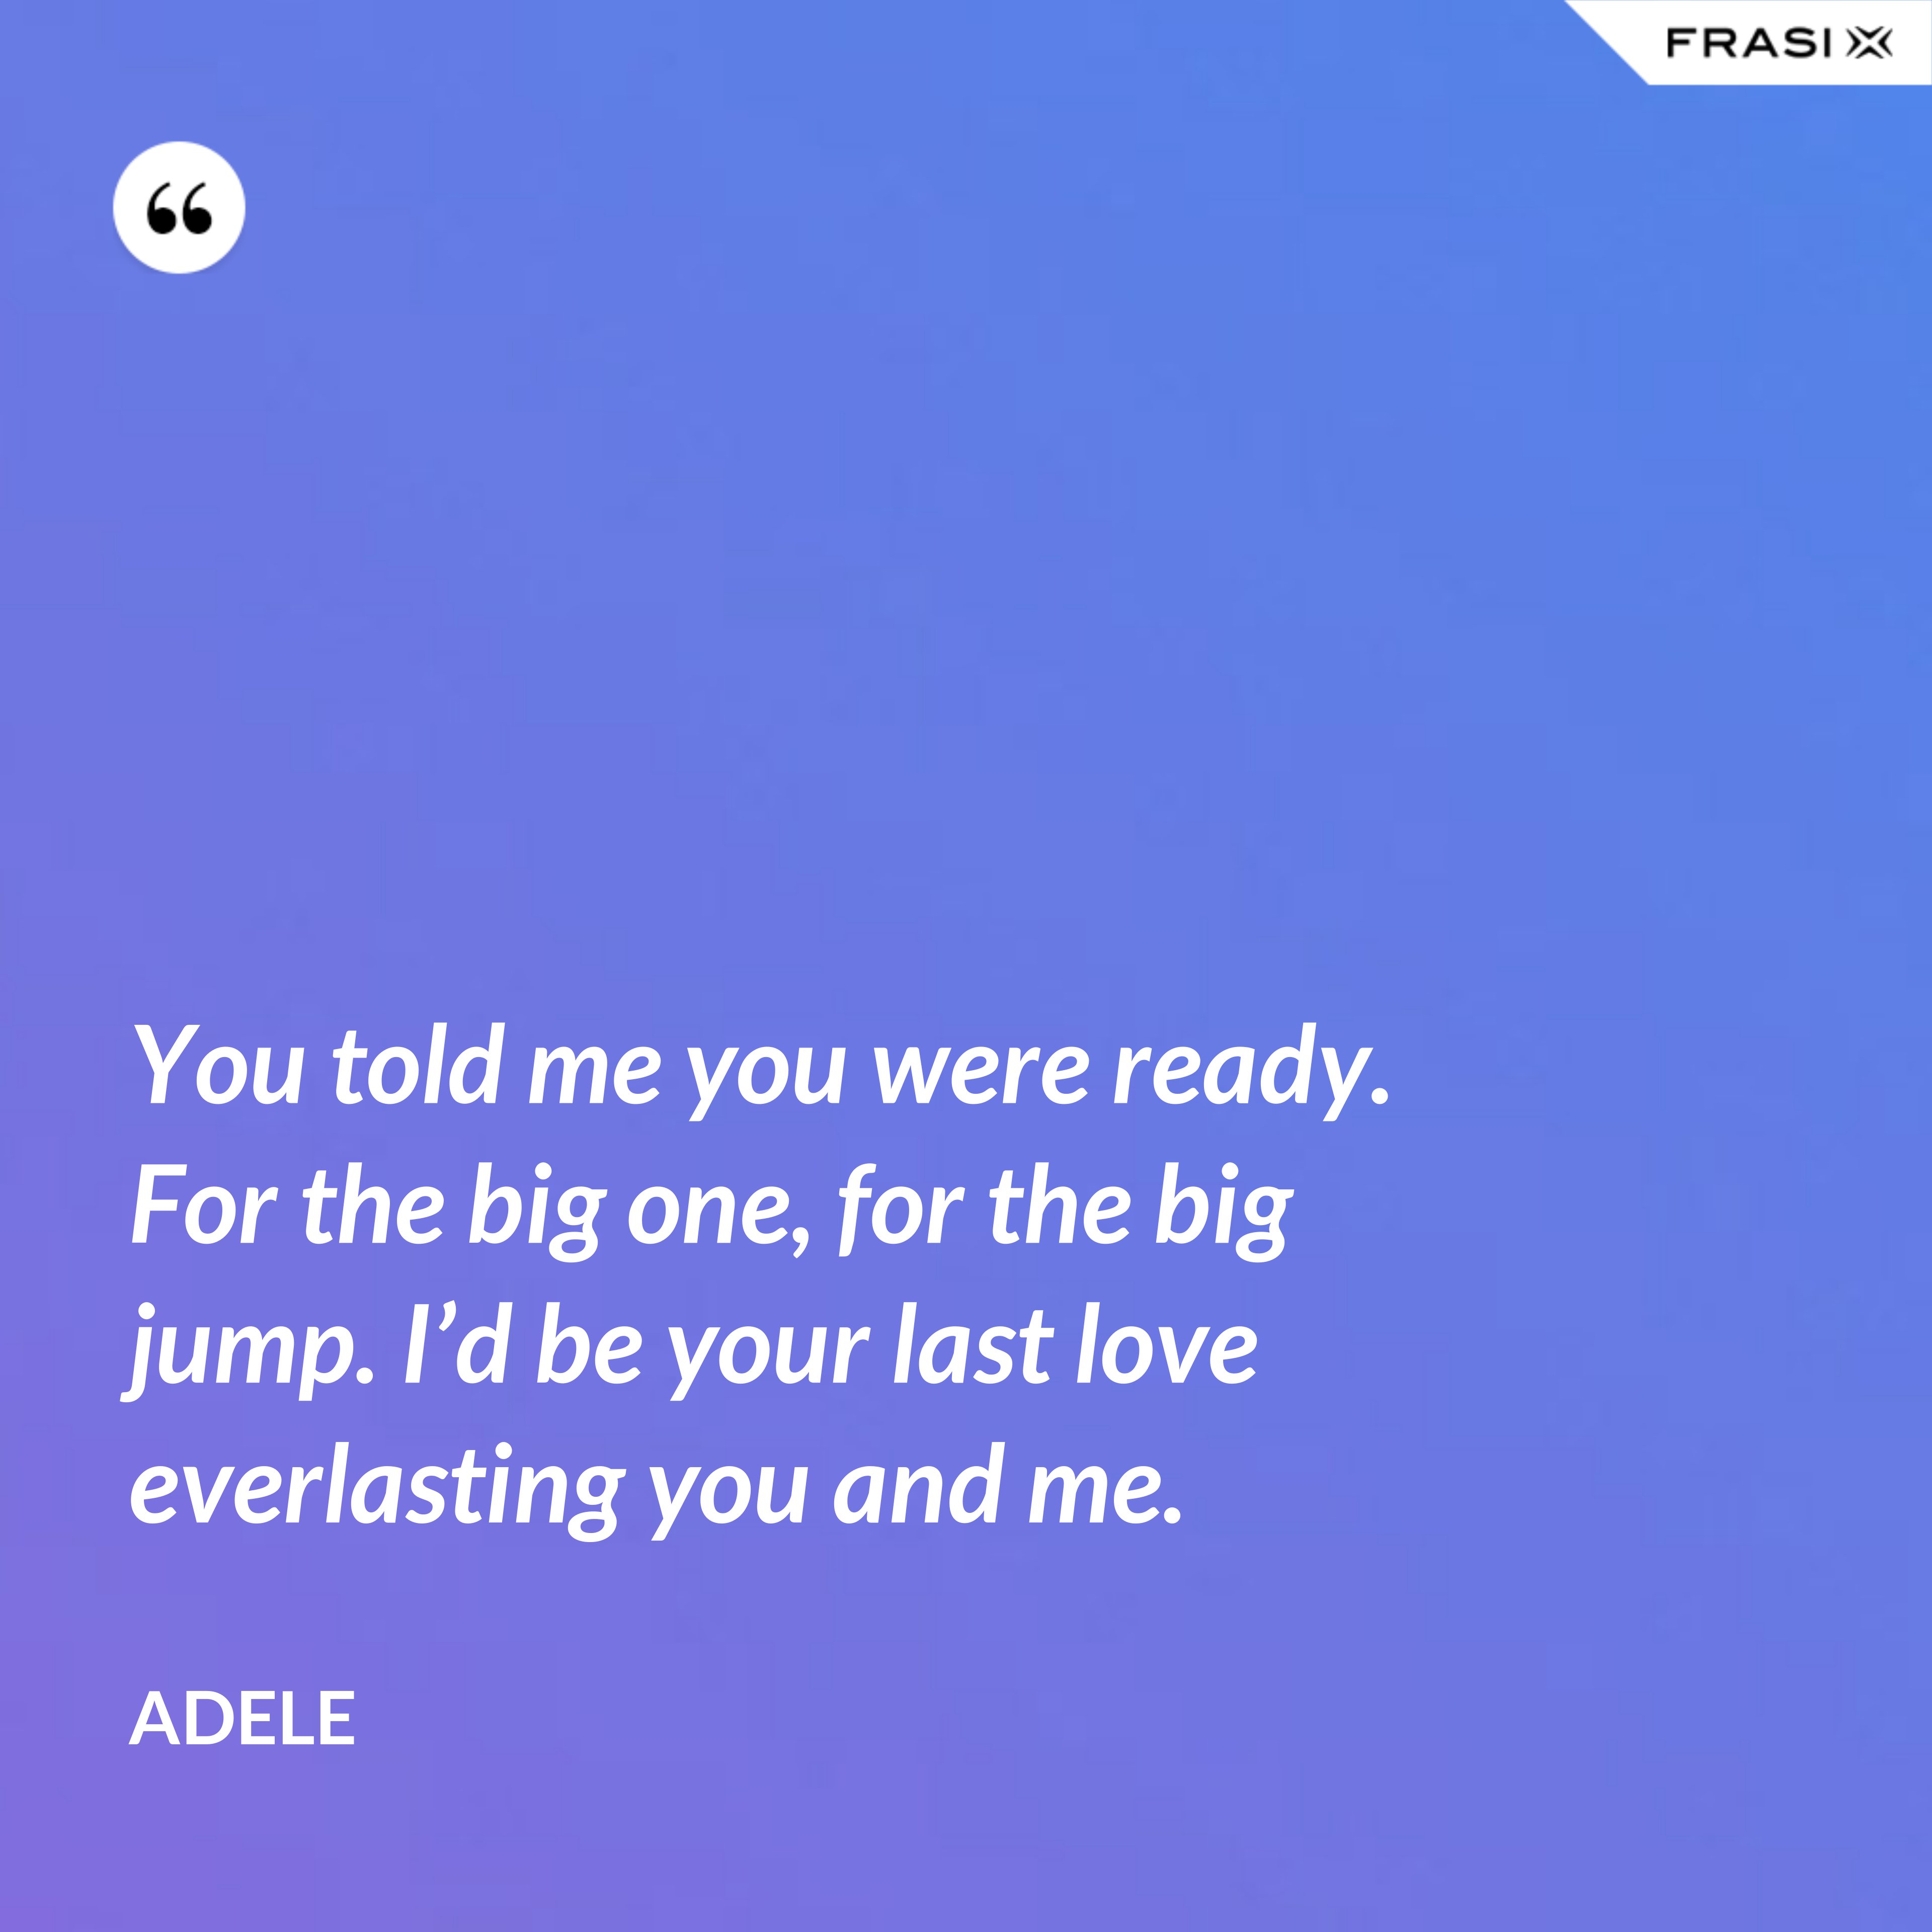 You told me you were ready. For the big one, for the big jump. I’d be your last love everlasting you and me. - Adele